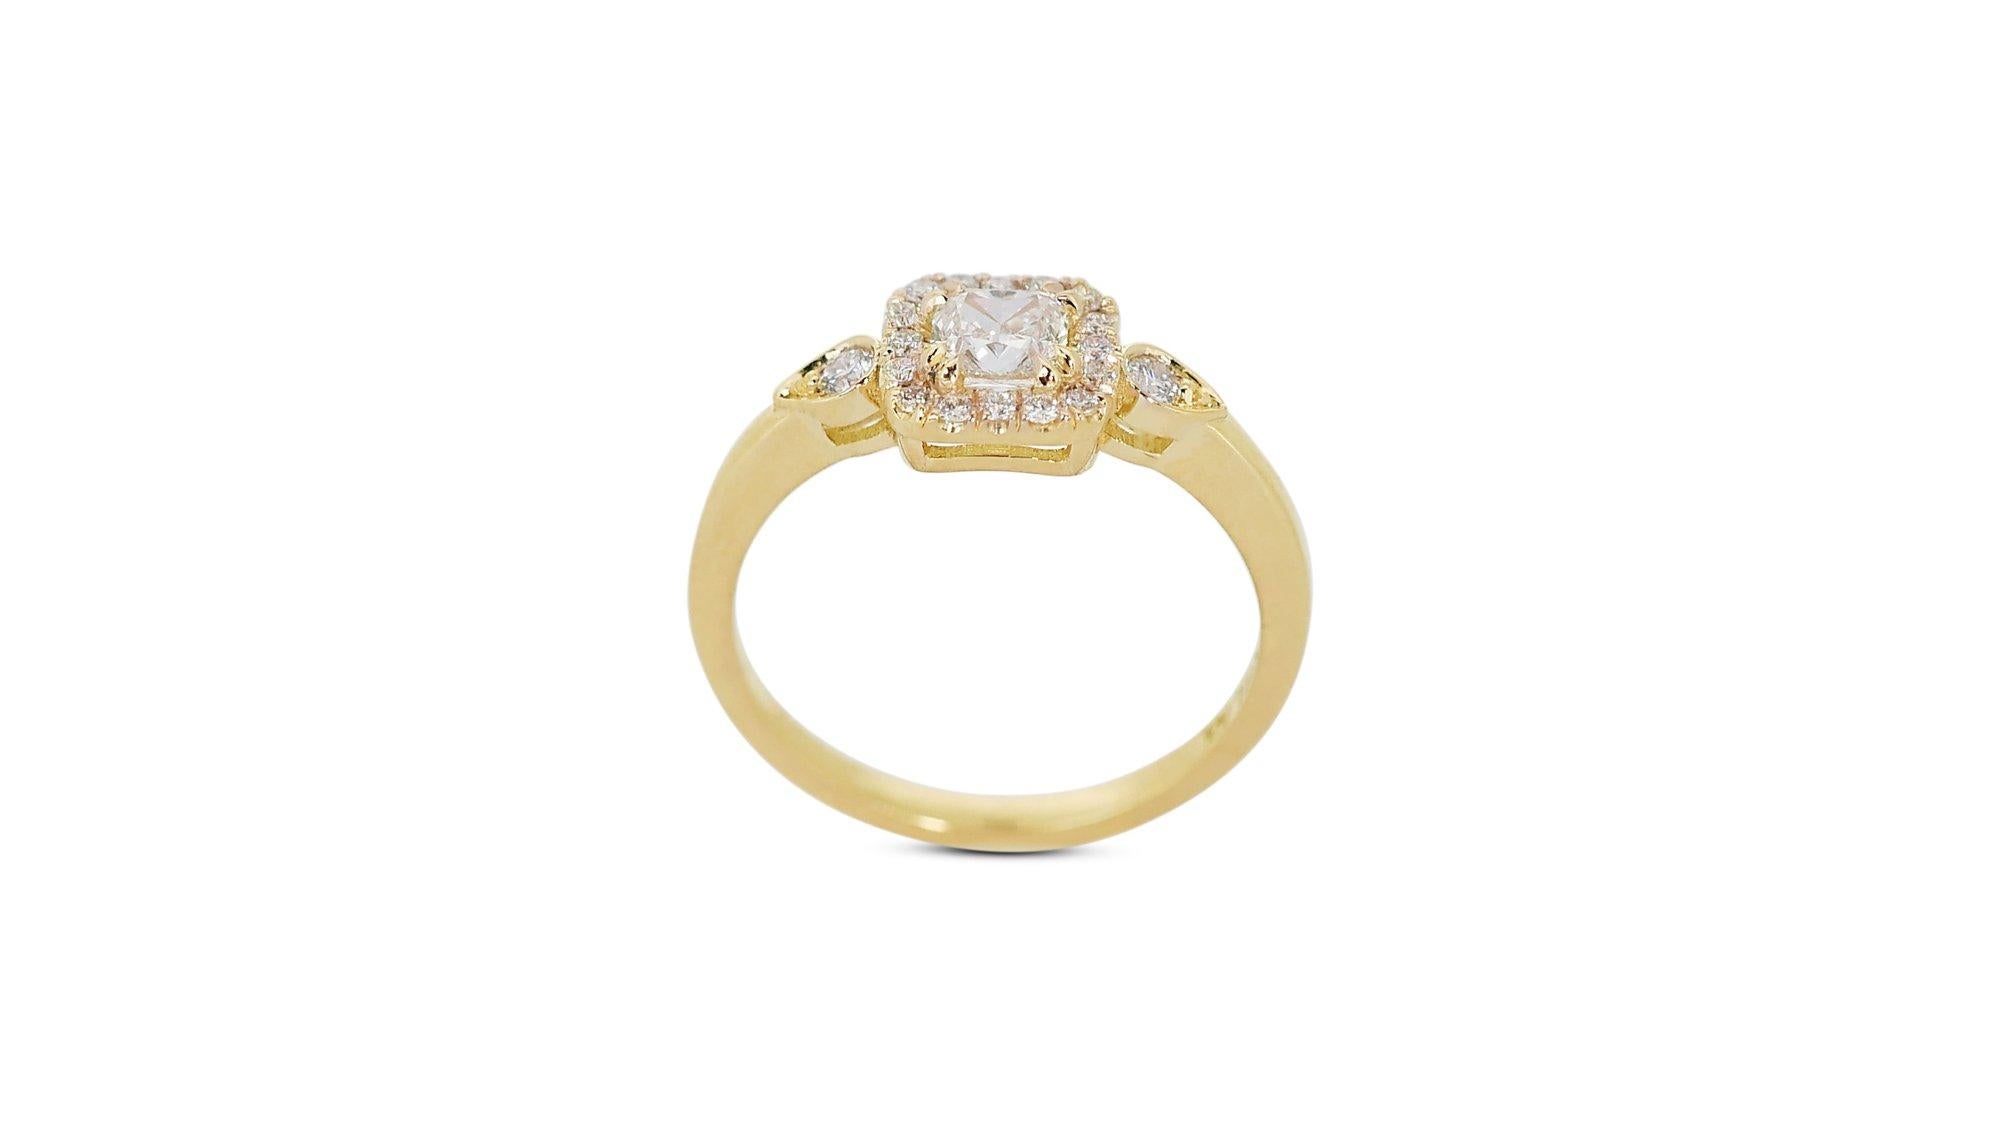 Lustrous 18K Yellow Gold Halo Natural Diamond Ring w/1.03 ct - GIA Certified For Sale 1